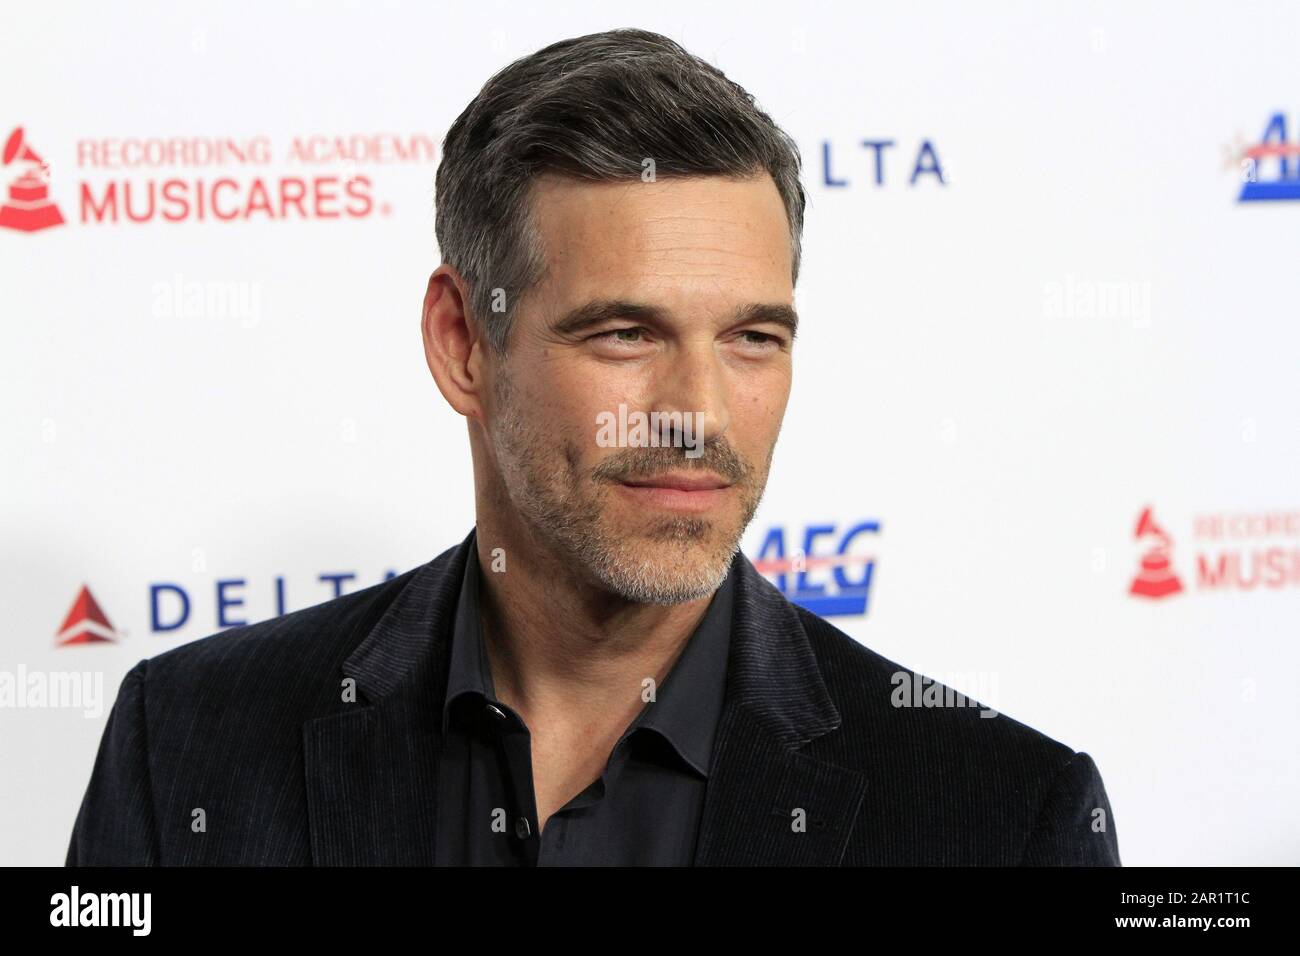 January 24, 2020, Los Angeles, CA, USA: LOS ANGELES - JAN 24:  Eddie Cibrian at the 2020 Muiscares at the Los Angeles Convention Center on January 24, 2020 in Los Angeles, CA (Credit Image: © Kay Blake/ZUMA Wire) Stock Photo